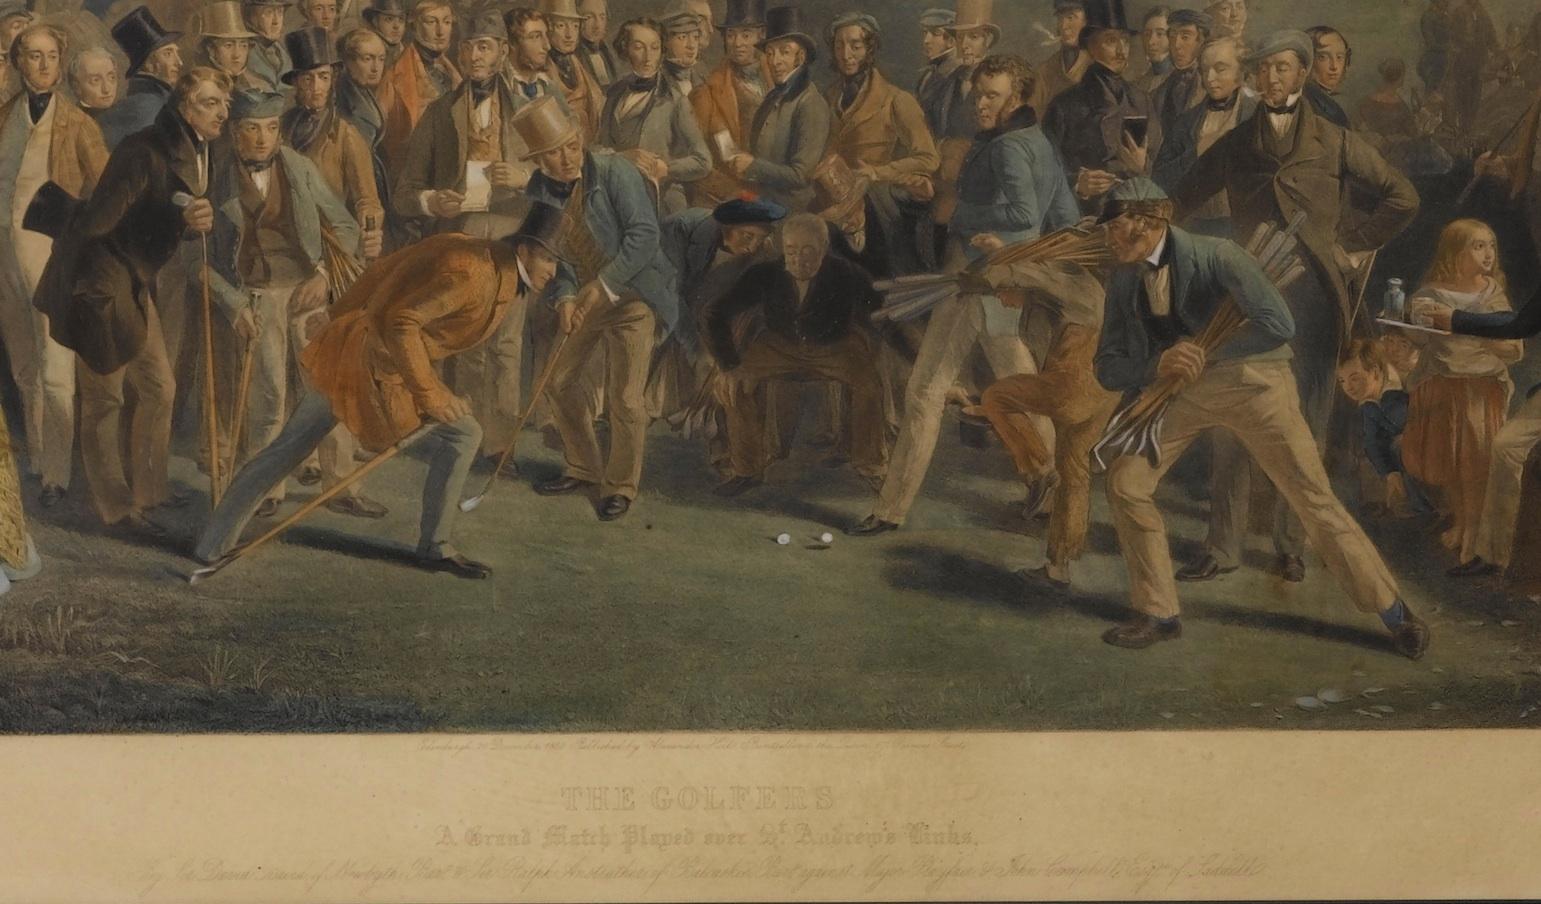 This is an original, 1st edition, 1850 hand-colored “Proof” steel engraving by Charles E. Wagstaffe after the original oil of 1847 by Charles Lees. Printed by W. Wolding of Edinburgh, this is an extremely rare version of golf’s most famous depiction